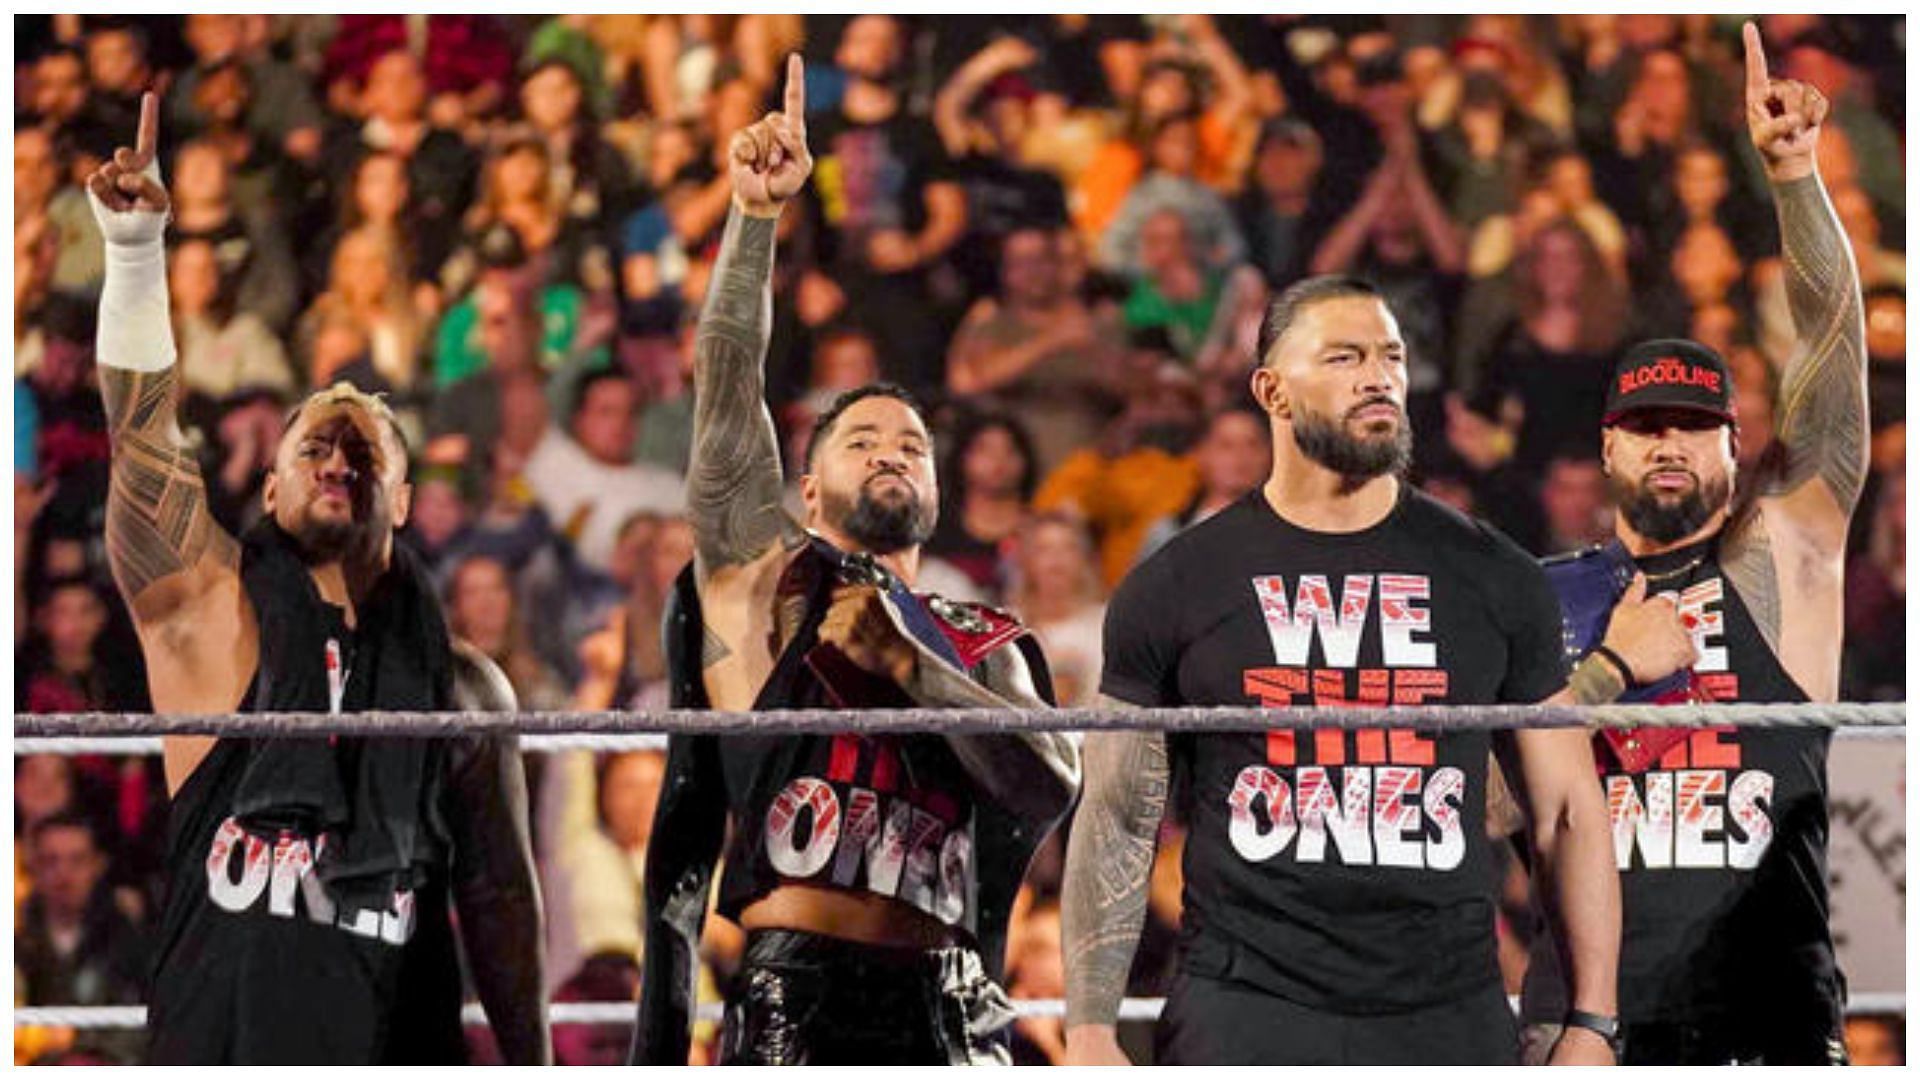 The Bloodline is the greatest faction in WWE.